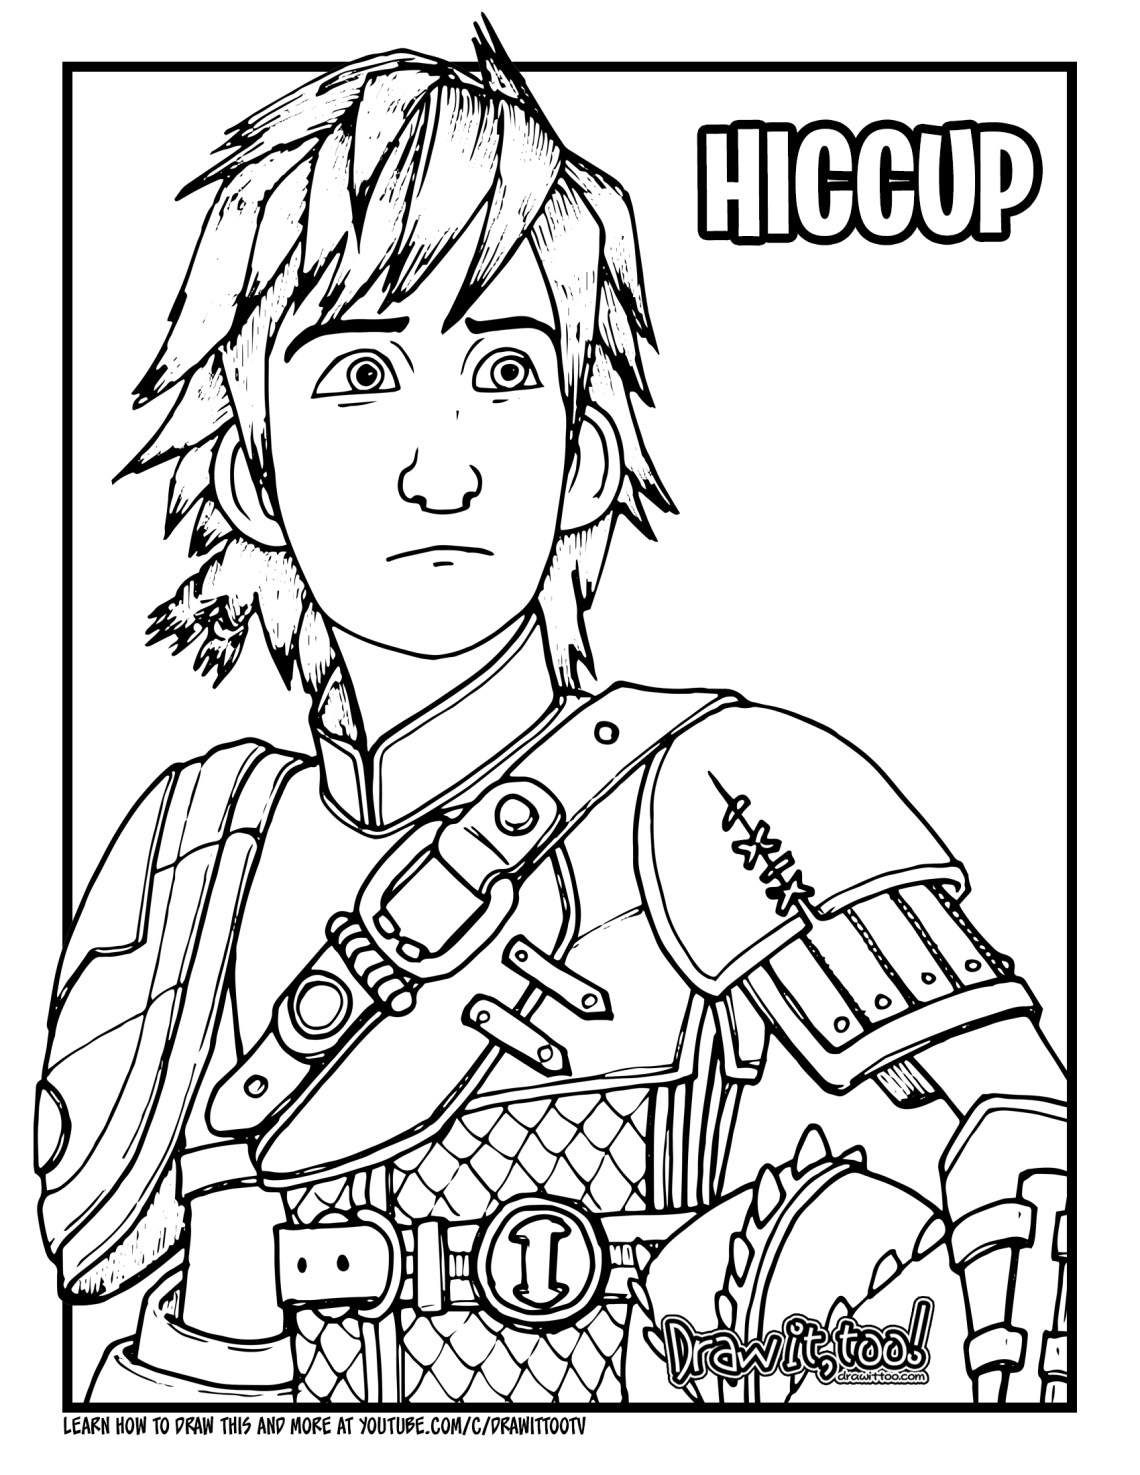 Hiccup Drawing Art